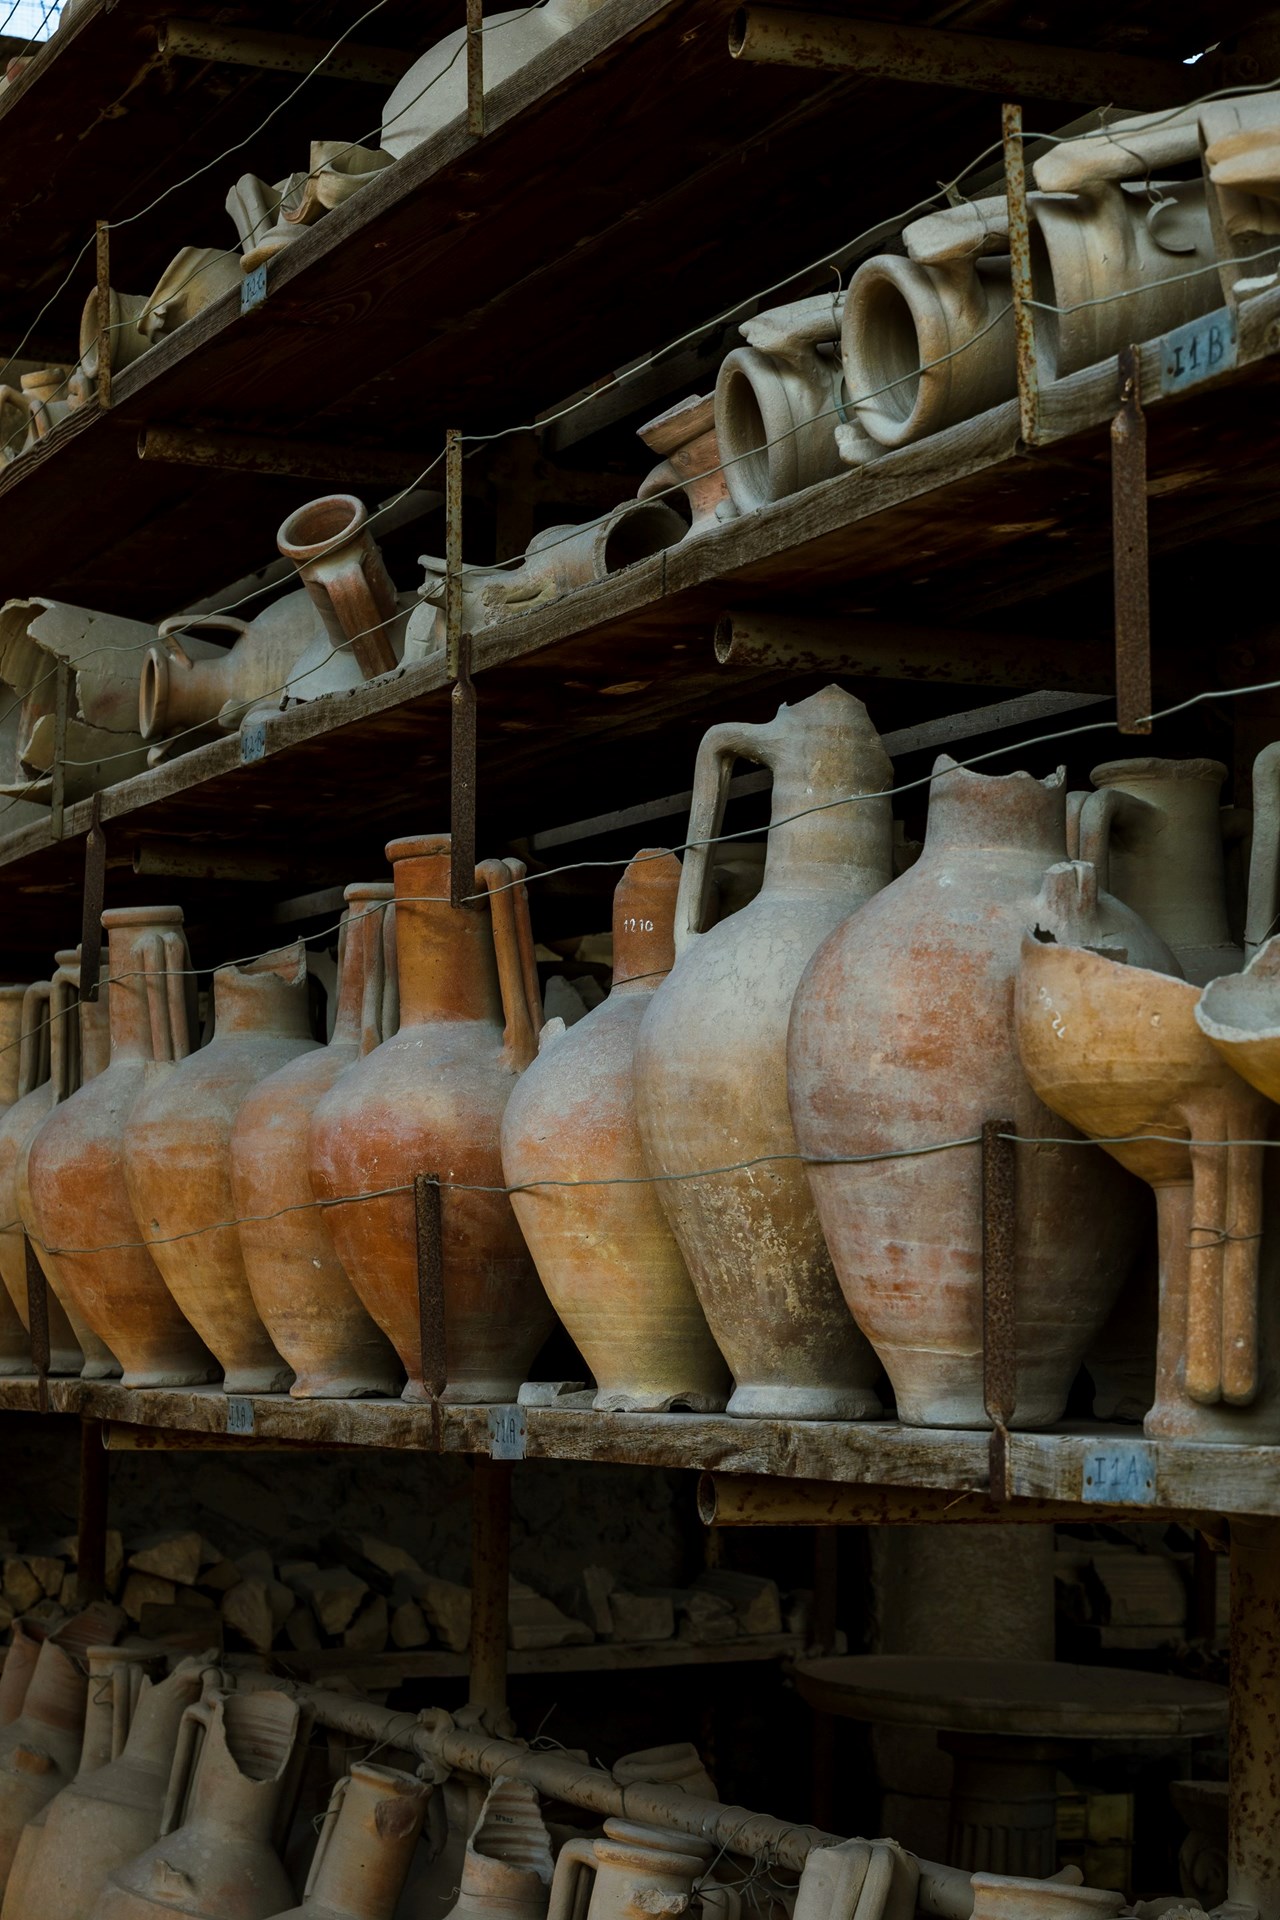 Collection of old terracotta pots on a shelf for restoration and display